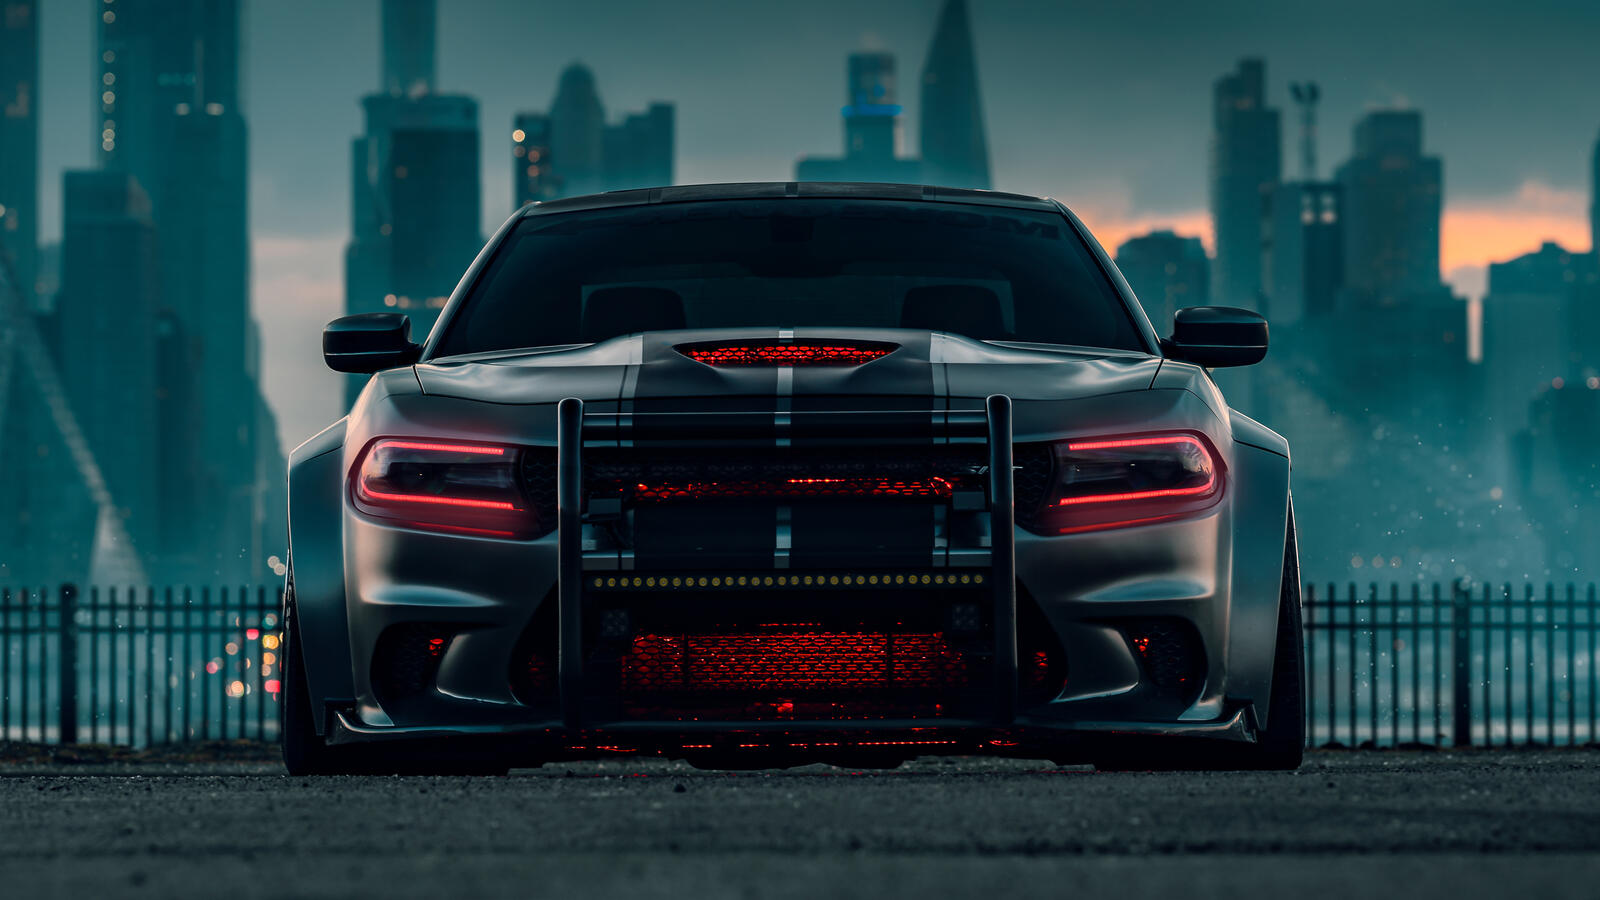 Wallpapers Dodge Charger cars view from front on the desktop